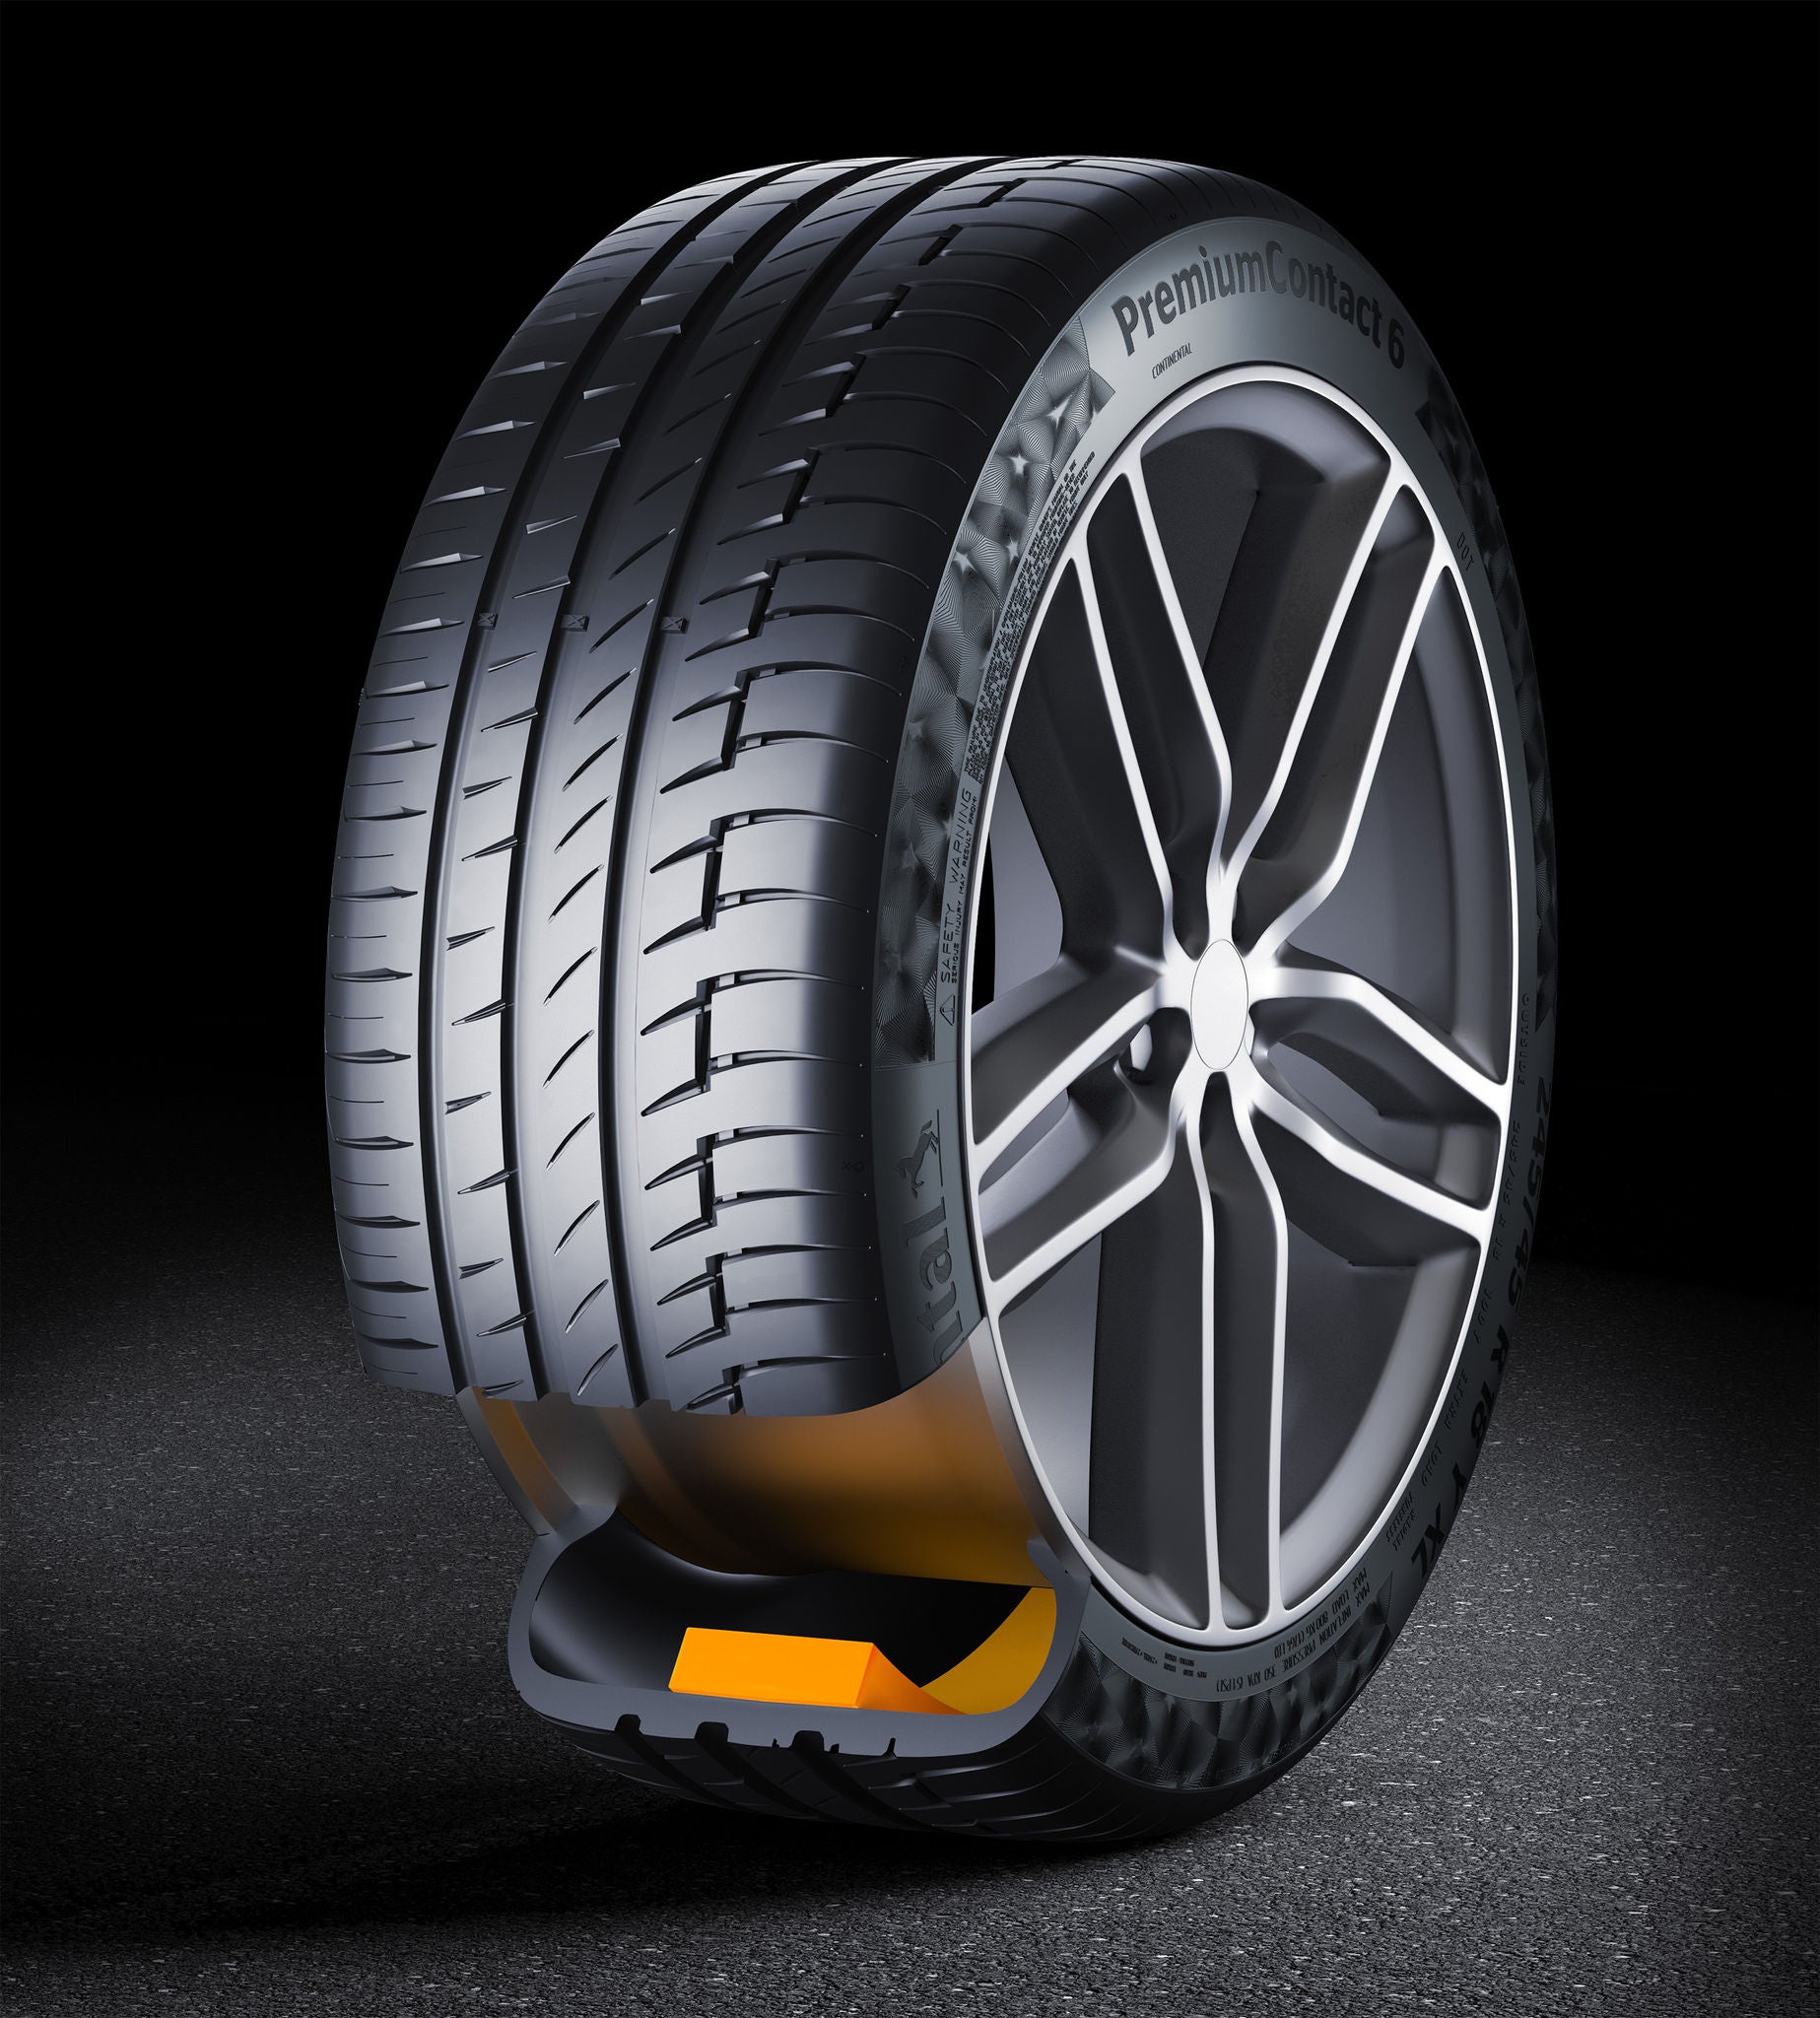  ContiSilent technology in a tire